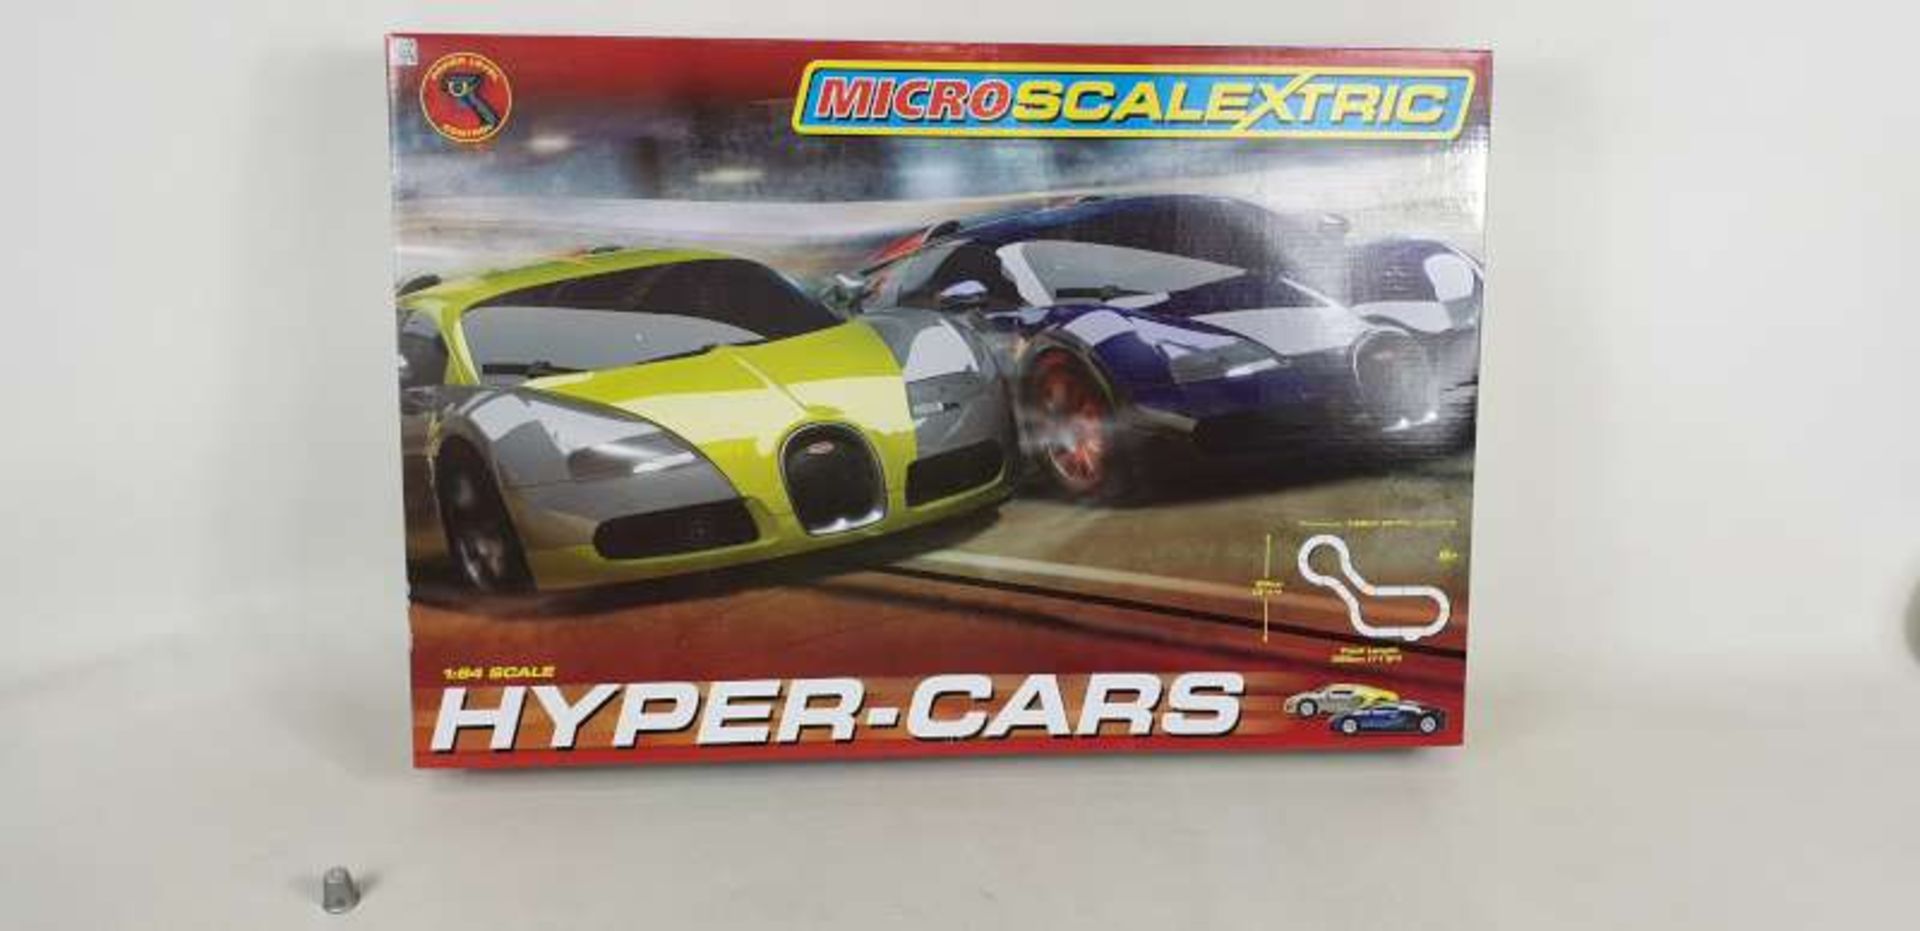 5 X HYPER CARS MICRO SCALEXTRIC AND 1 X MINI CHALLENGE SCALEXTRIC